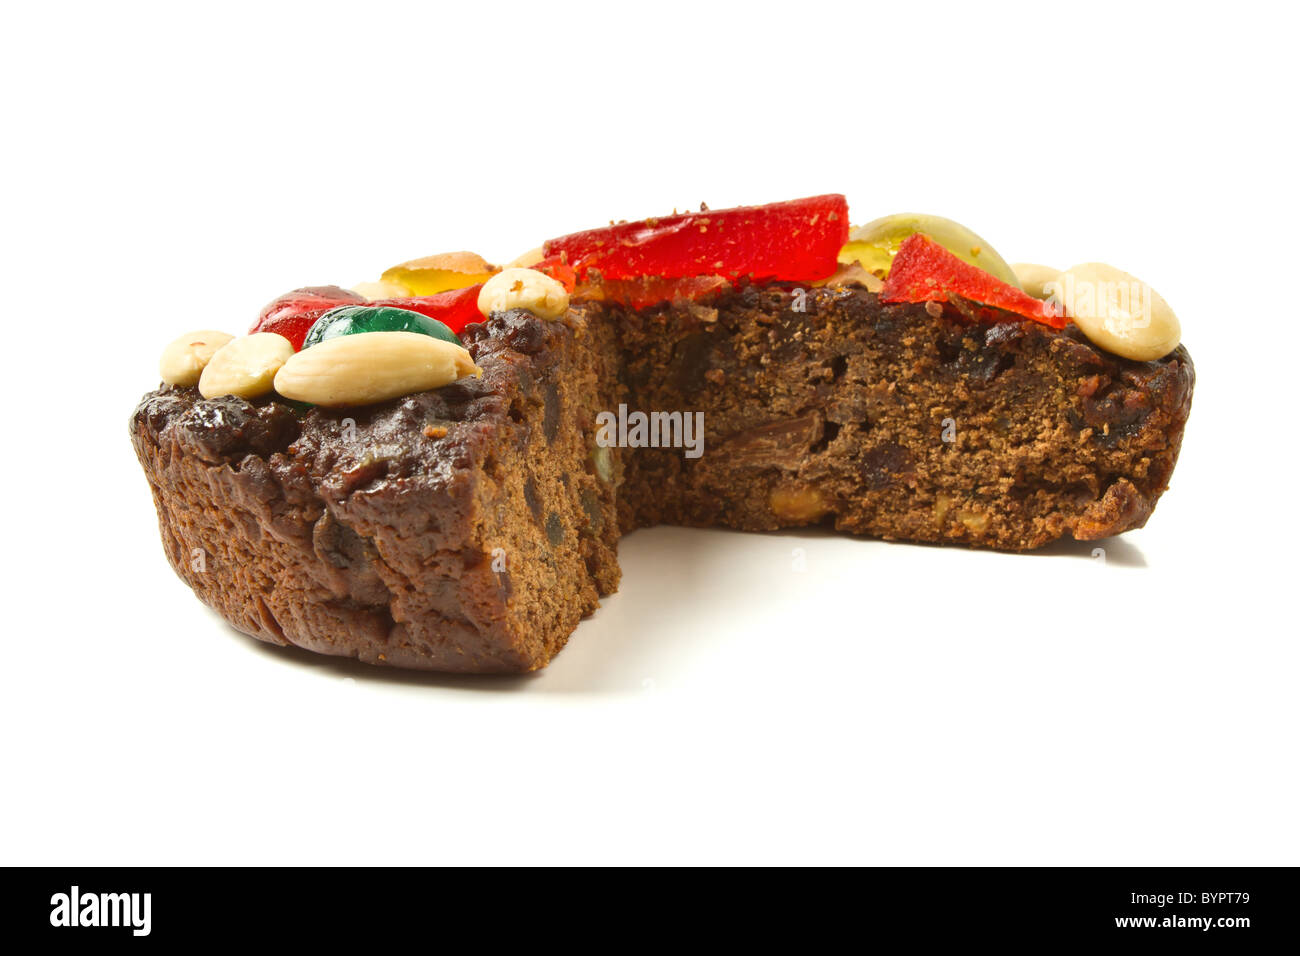 Italian Chocolate Fruit Cake topped with nuts and glace fruits. Stock Photo